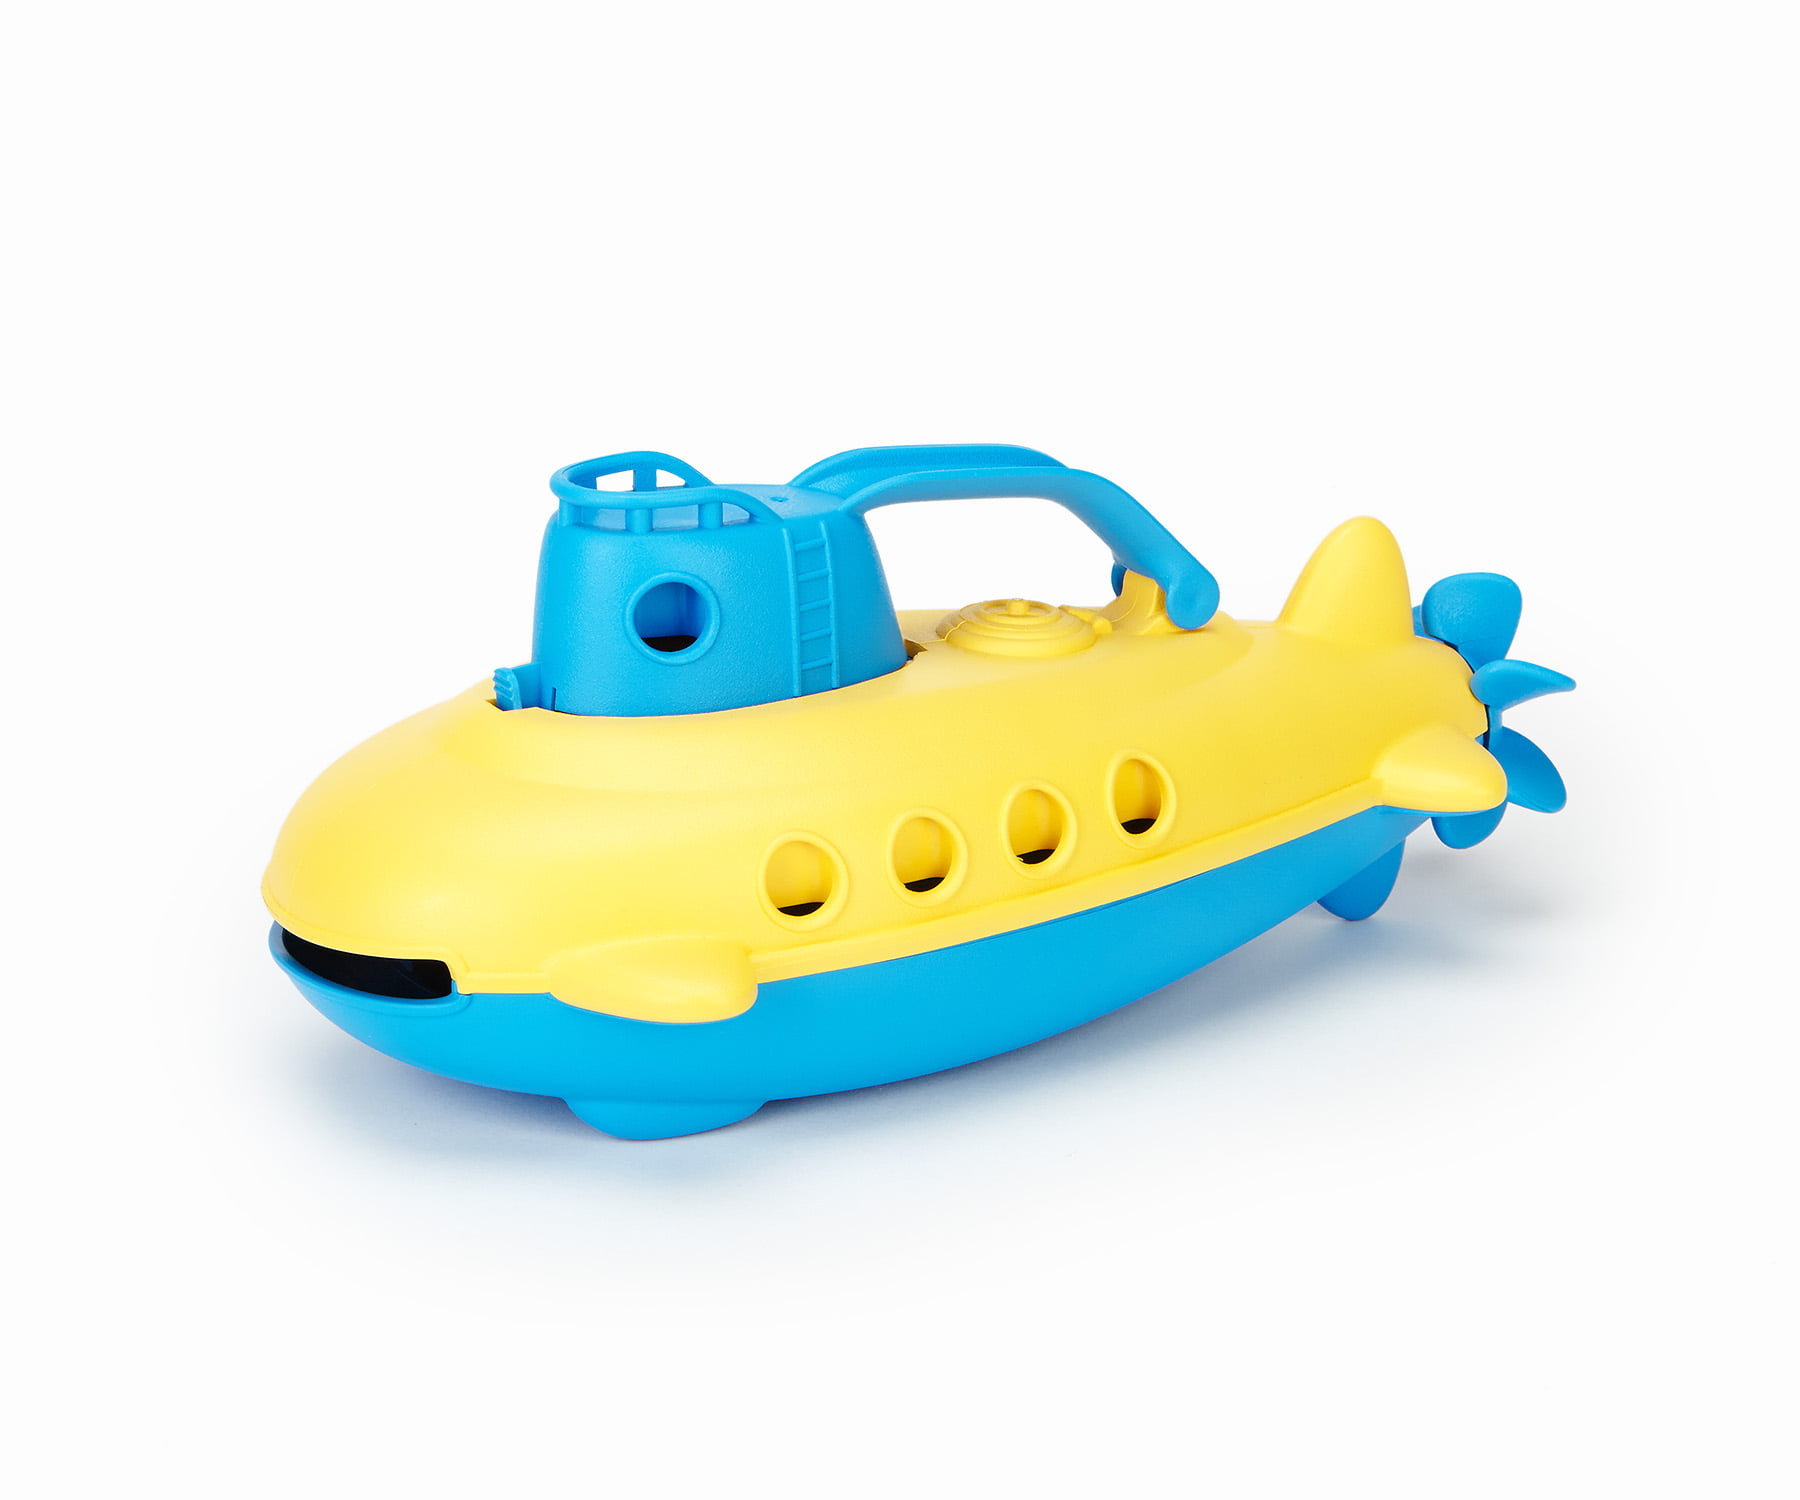 Bath Toy with Spinning Rear Propeller BPA Free Submarine in Yellow & Blue Safe Toys for Toddlers Phthalate Free Babies